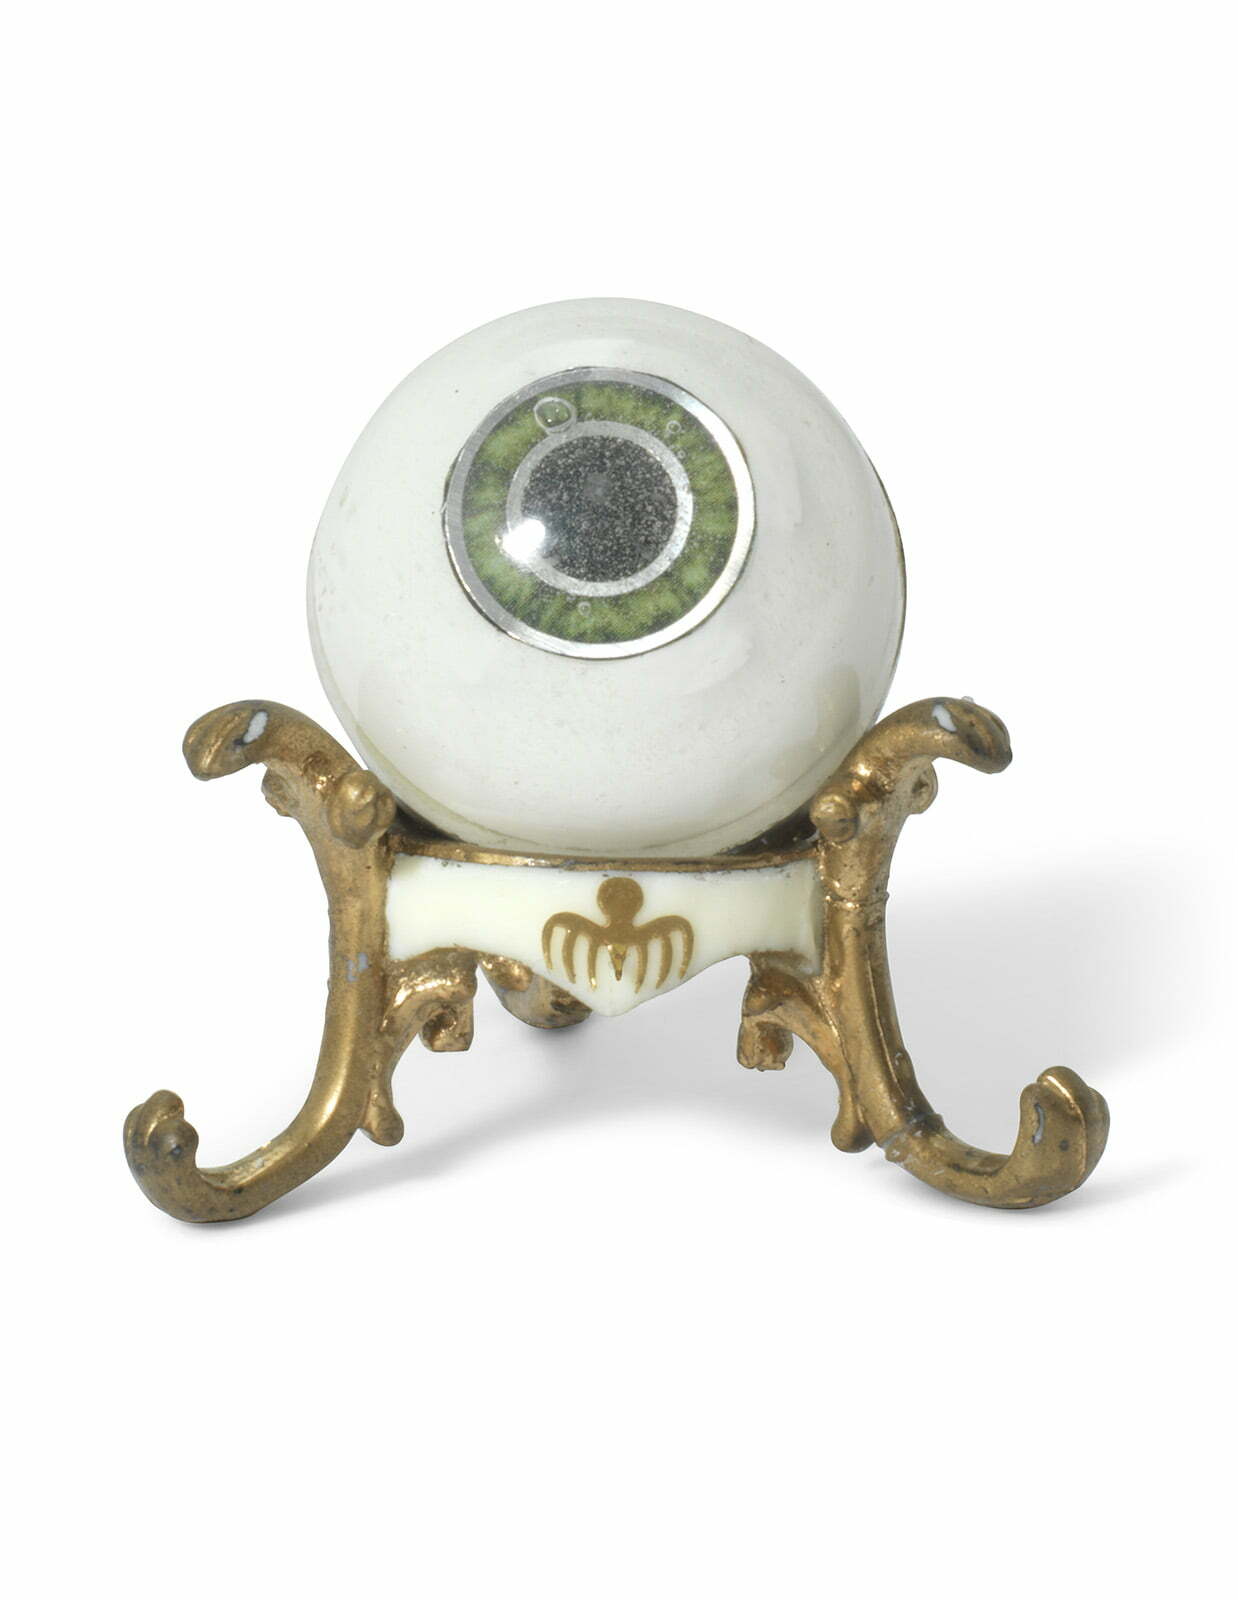 NO TIME TO DIE (2021)  SPECTRE AGENT PRIMO'S BIONIC EYEBALL